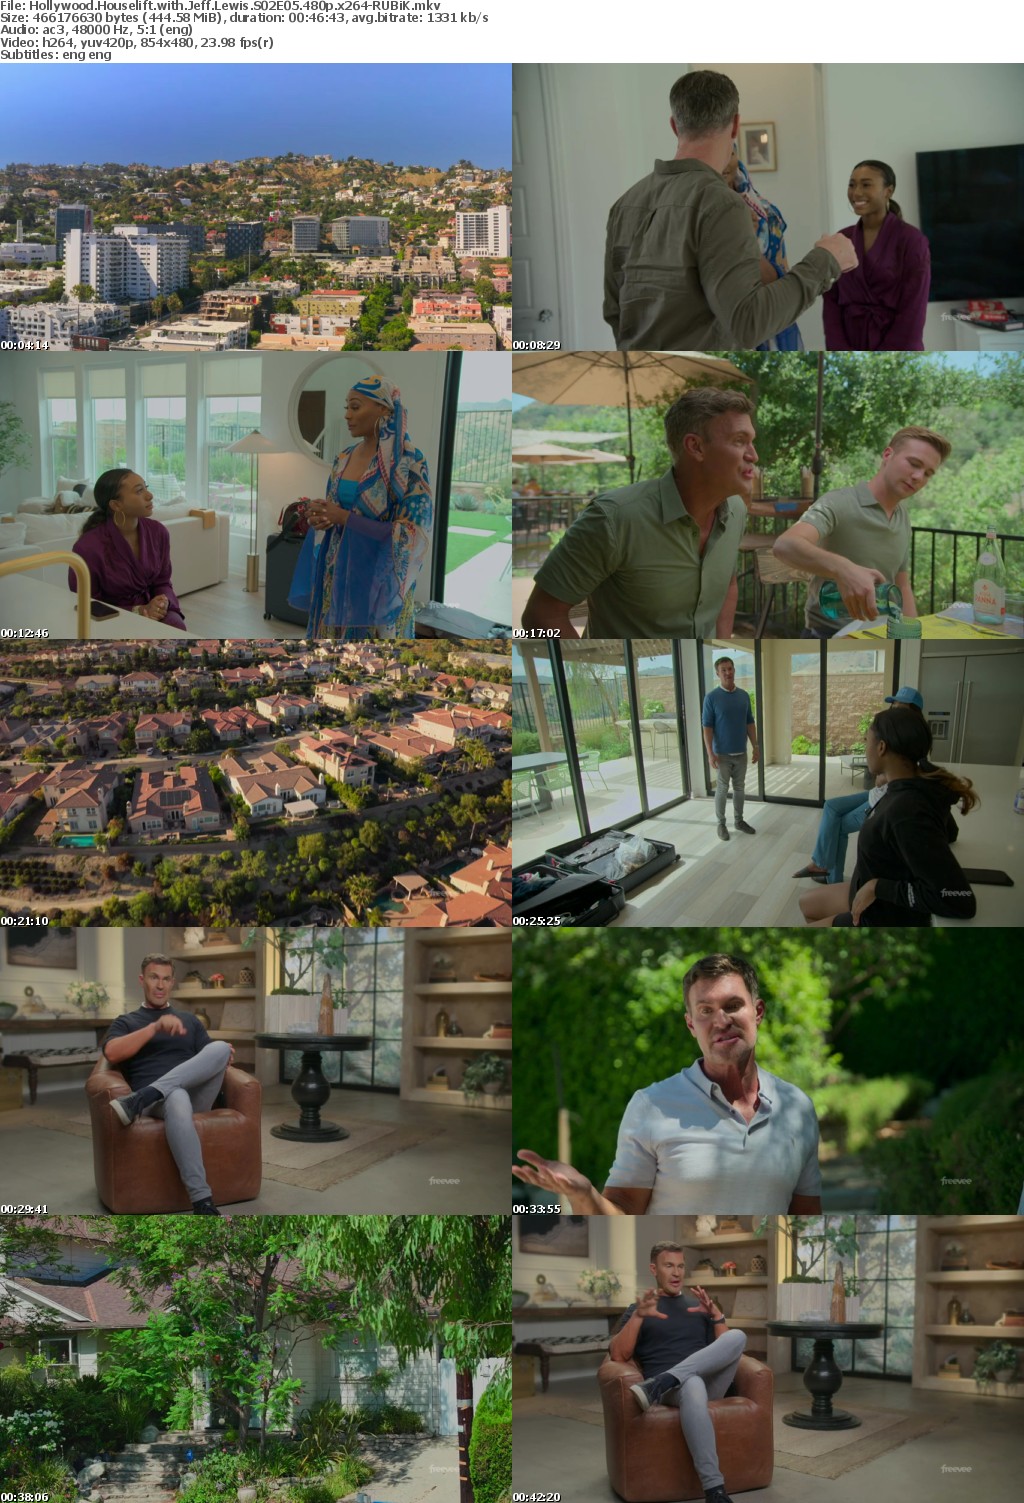 Hollywood Houselift with Jeff Lewis S02E05 480p x264-RUBiK